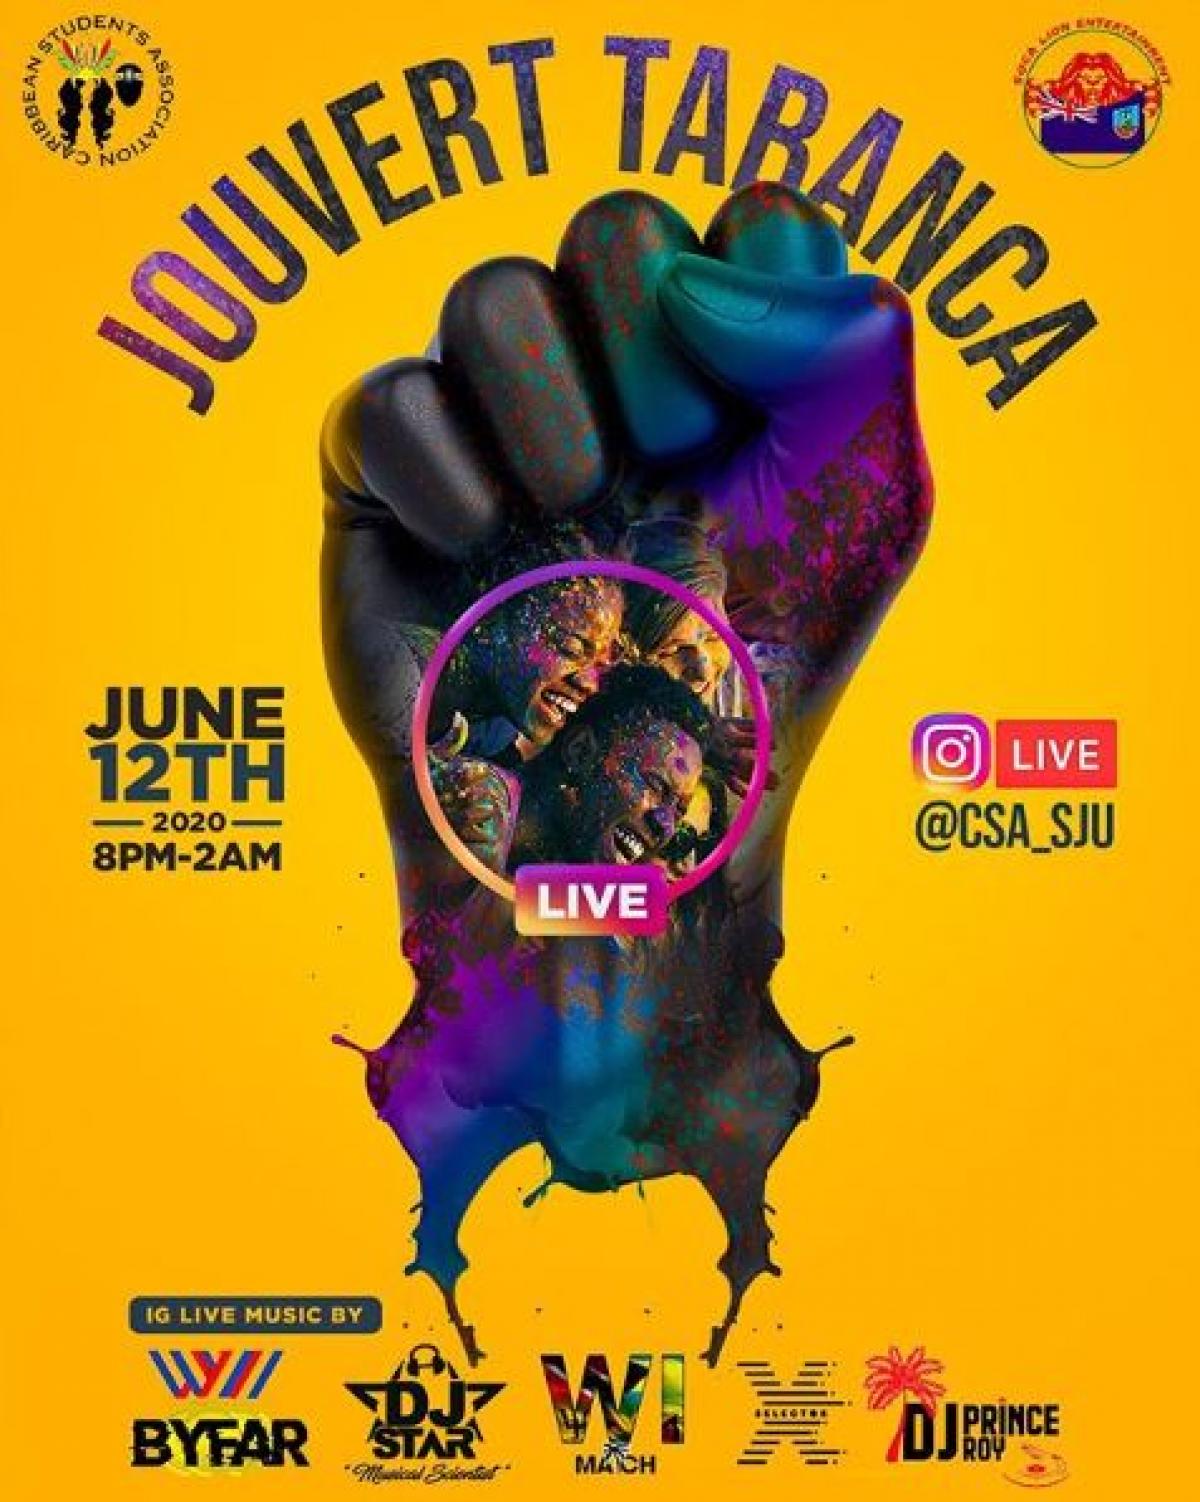 Jouvert Tabanca flyer or graphic.